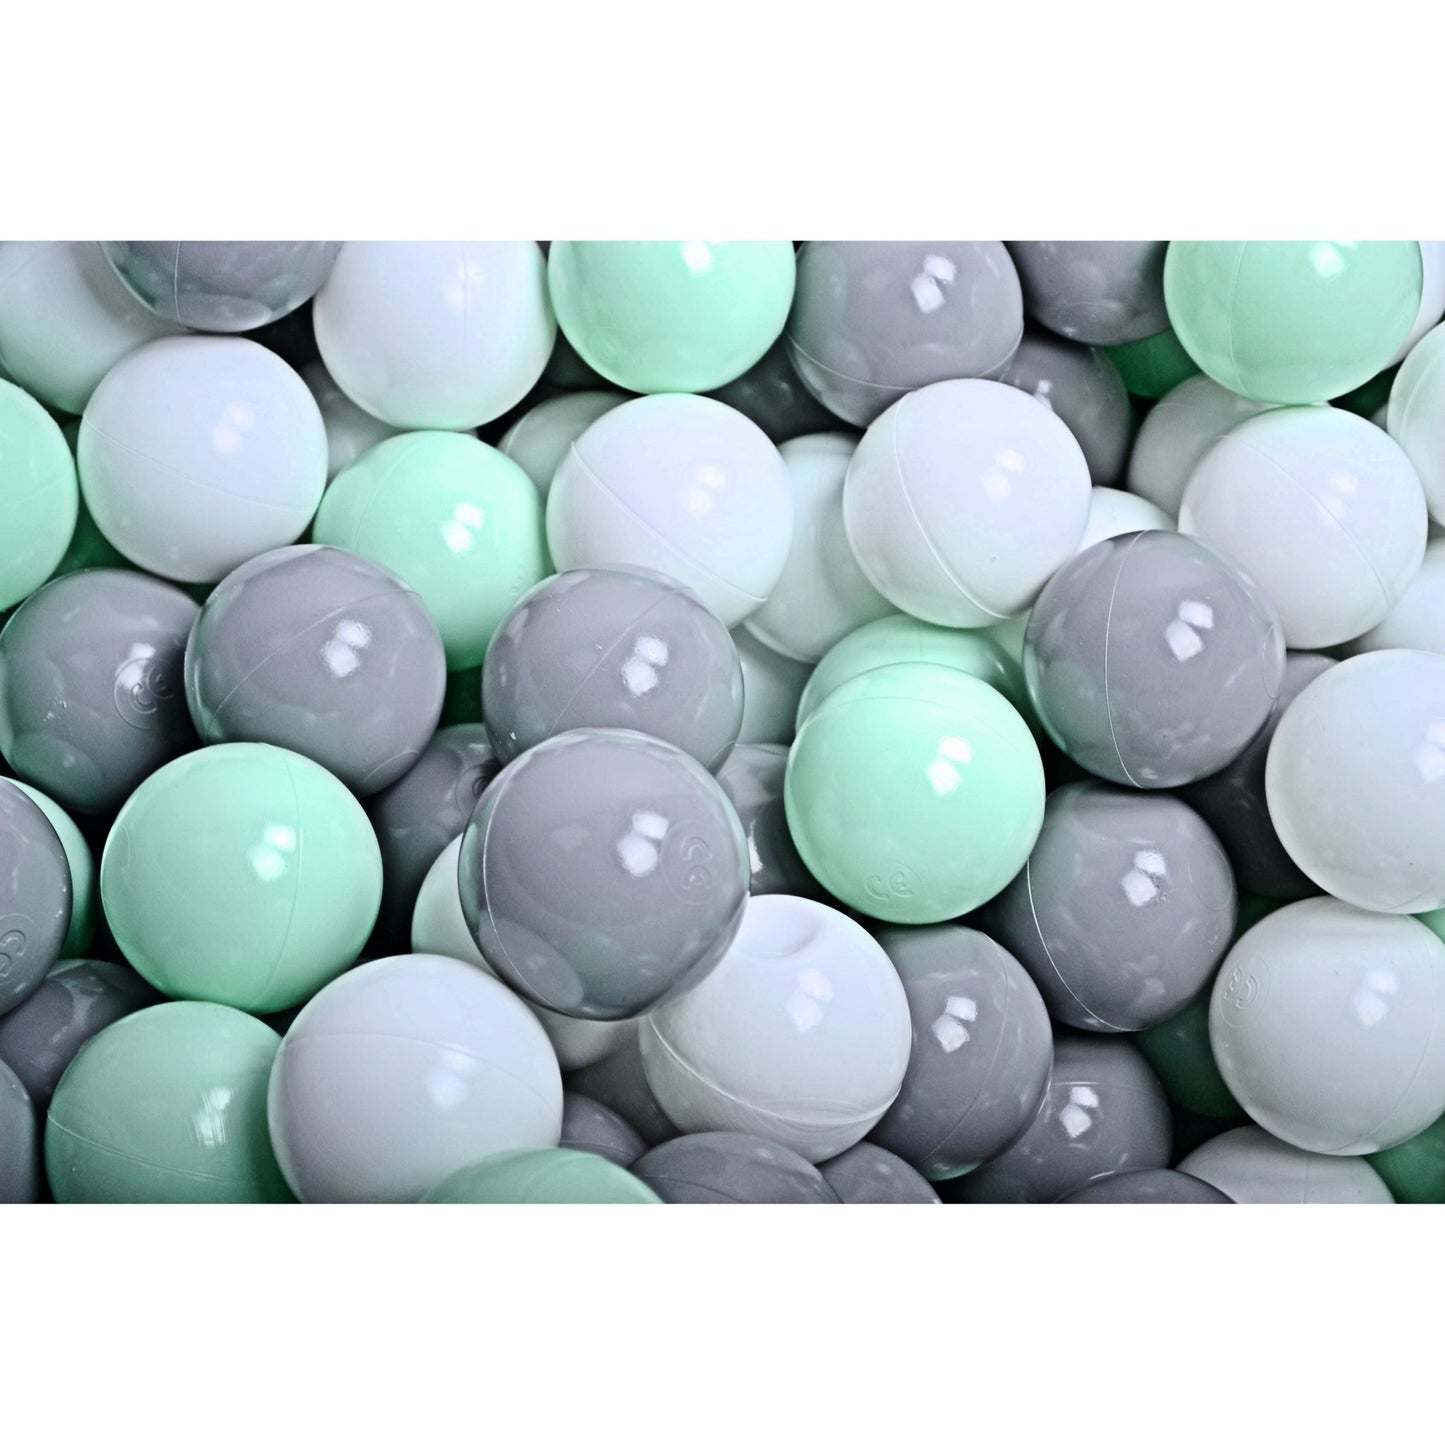 Green Velvet Round Foam Ball Pit - Select Your Own Balls - The Online Toy Shop - Ball Pit - 6